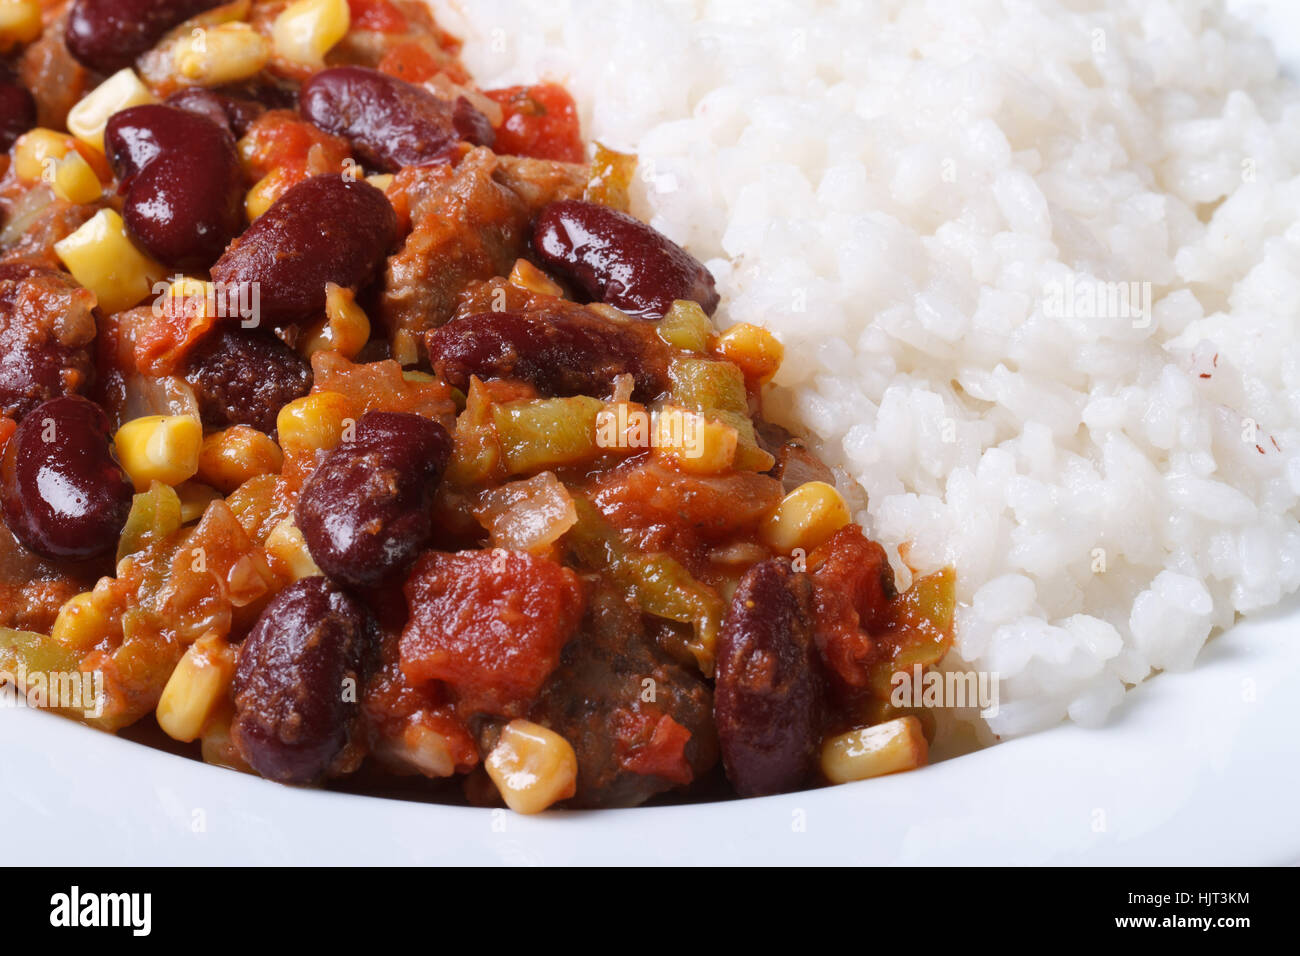 Mexican cuisine: chili con carne and rice macro horizontal Stock Photo